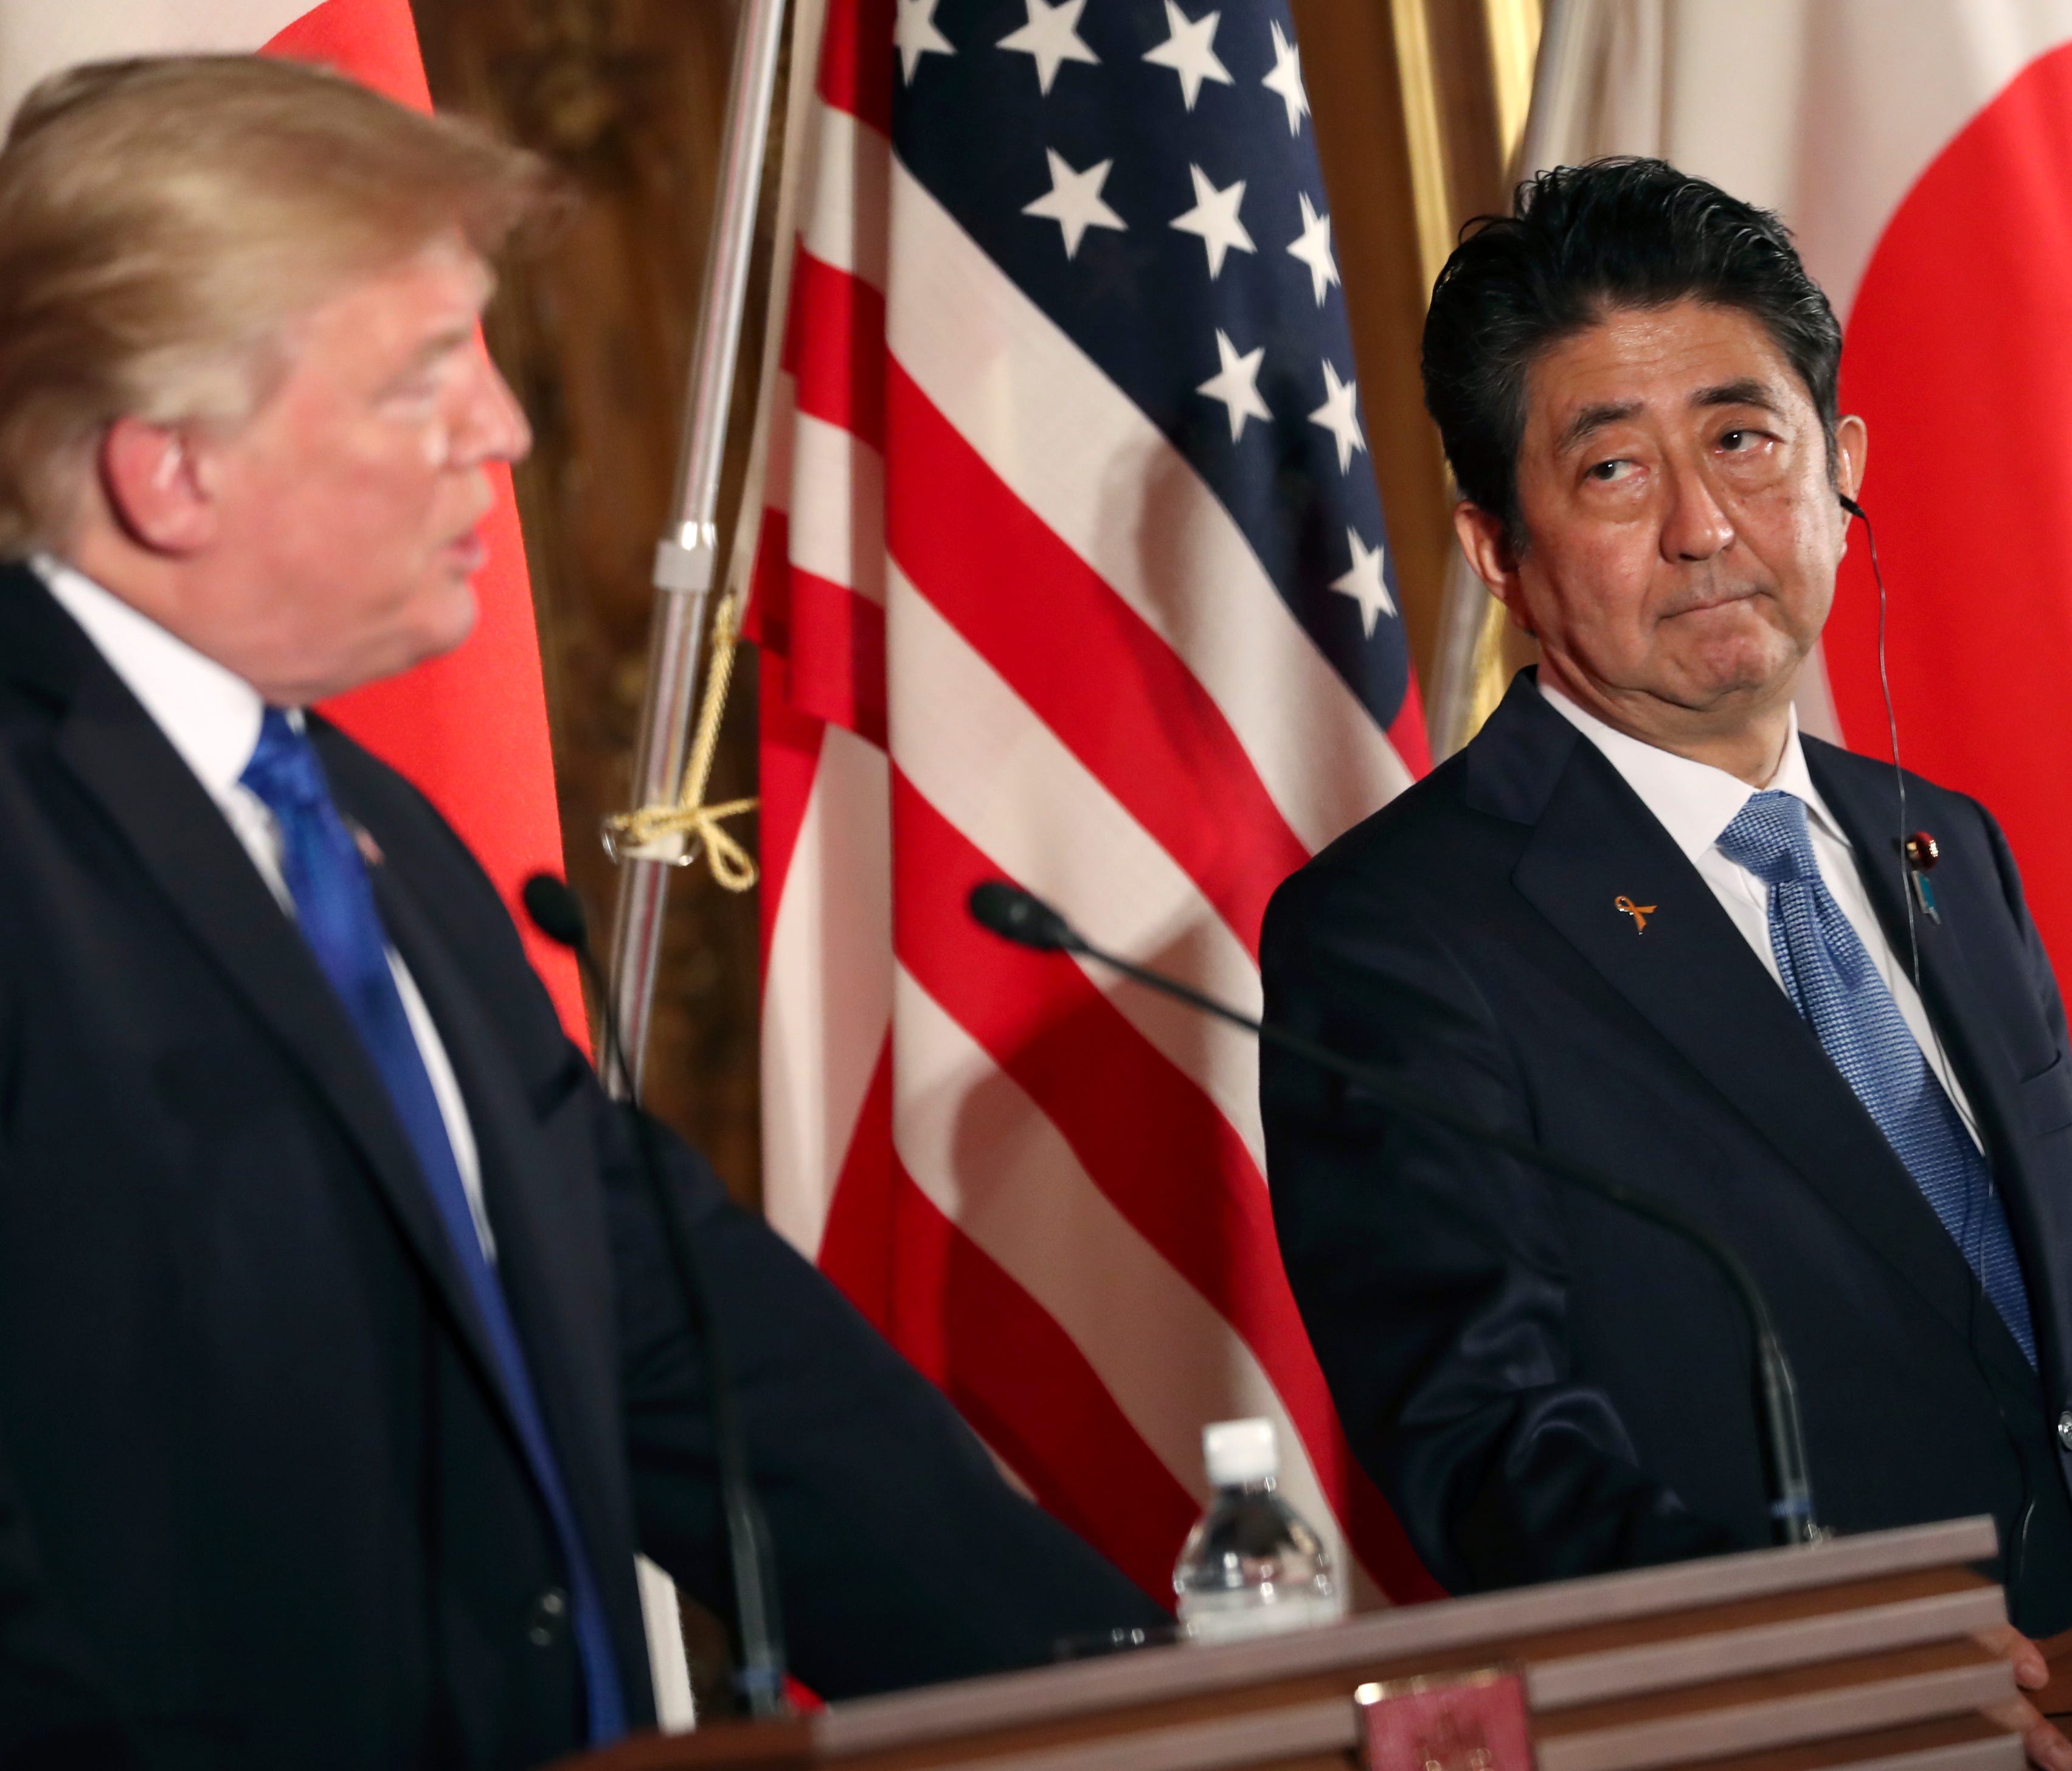 President Trump and Japanese Prime Minister Shinzo Abe at their news conference.